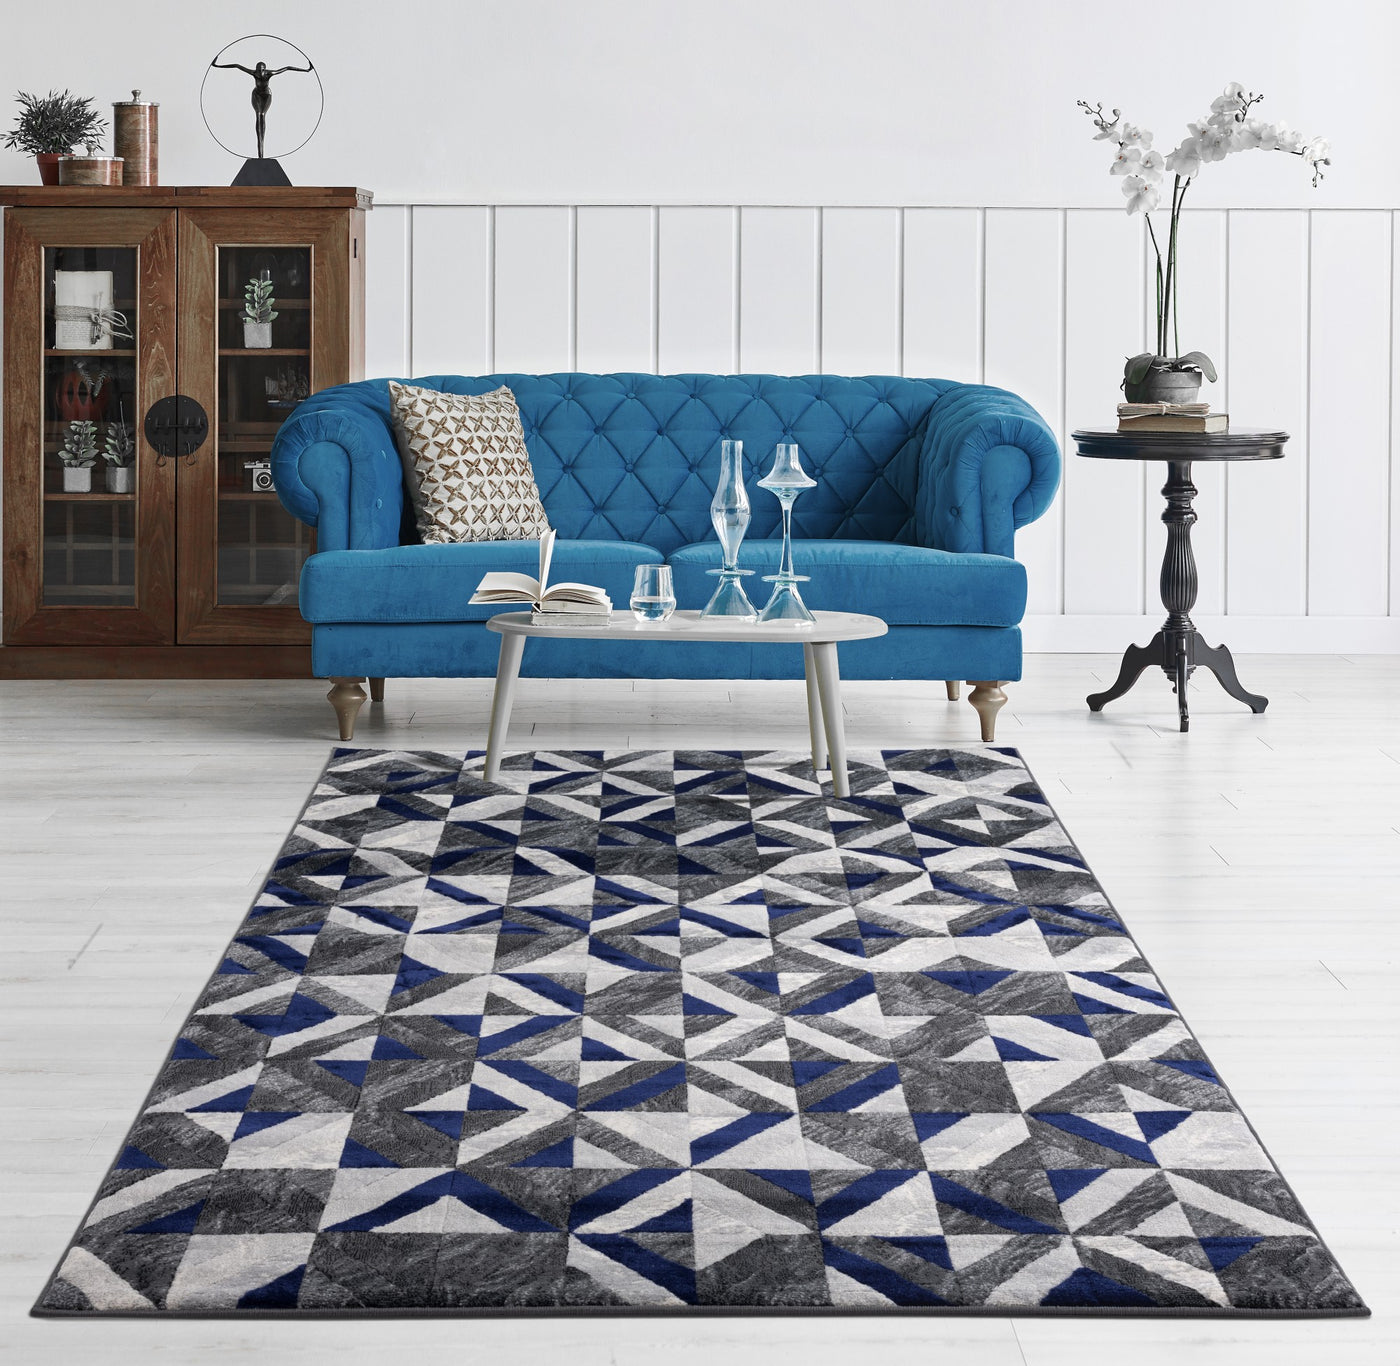 Durable Flat Weave No Shedding Lifestyle 701 Area Rug by Rug Factory Plus - Rug Factory Plus